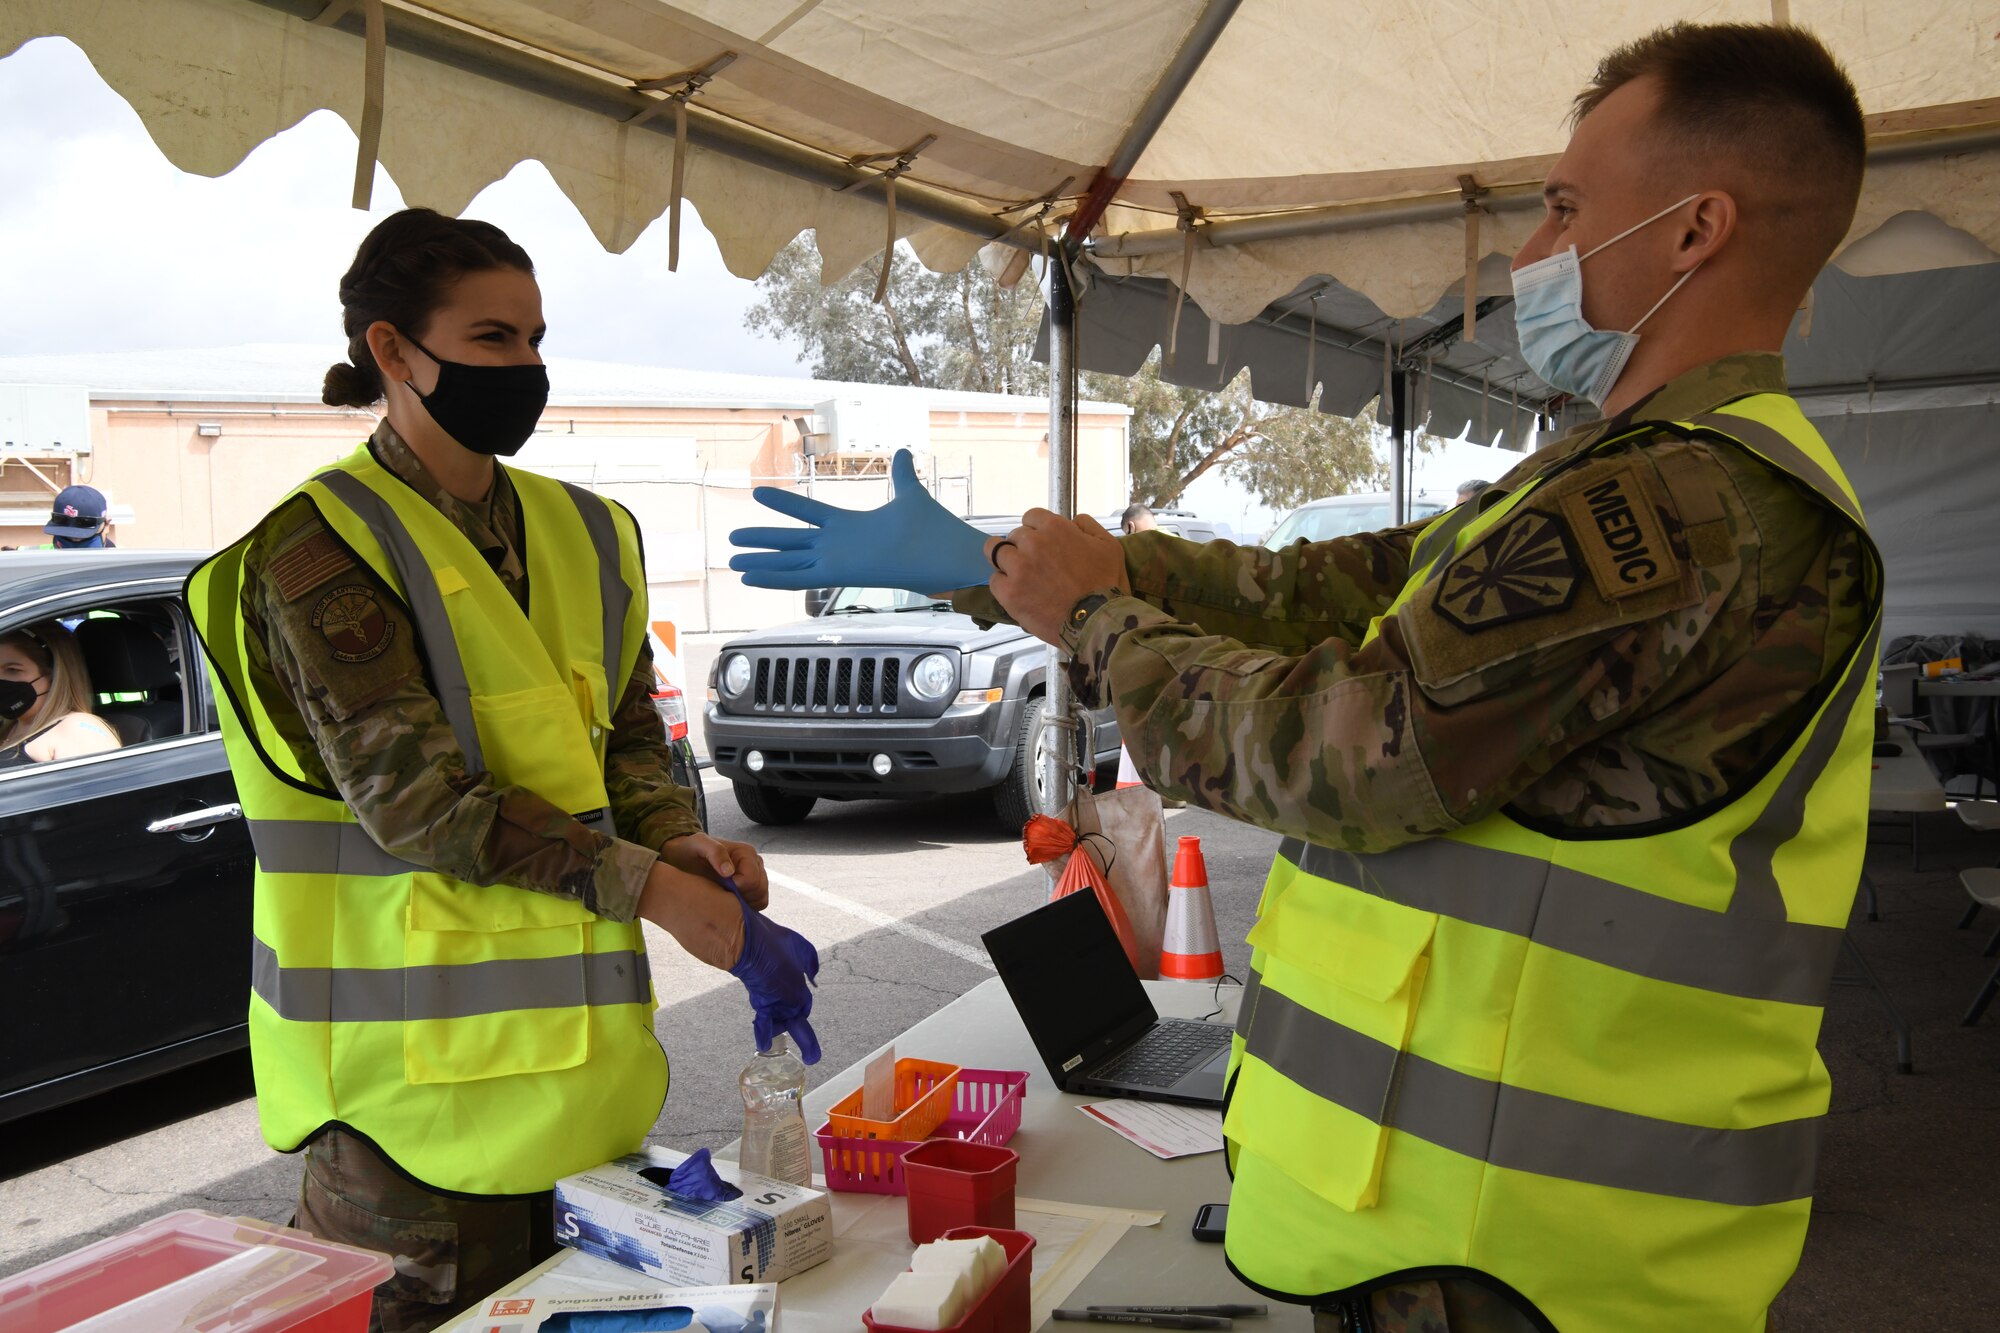 Reserve Airman Senior Airman Danielle Ippolito, 944th Medical Squadron nurse, and Army Guard Specialist Karston Gardner, Combat Medic, 856th Military Police Company, prepare to administer COVID-19 shots to Salt River Pima-Maricopa Indian Community residents at the Salt-River Point of Dispensing site, March 26, 2021. As part of the Arizona National Guard Task Force Medical, servicemembers are augmenting vaccination sites for communities with low staffing and a high demand.